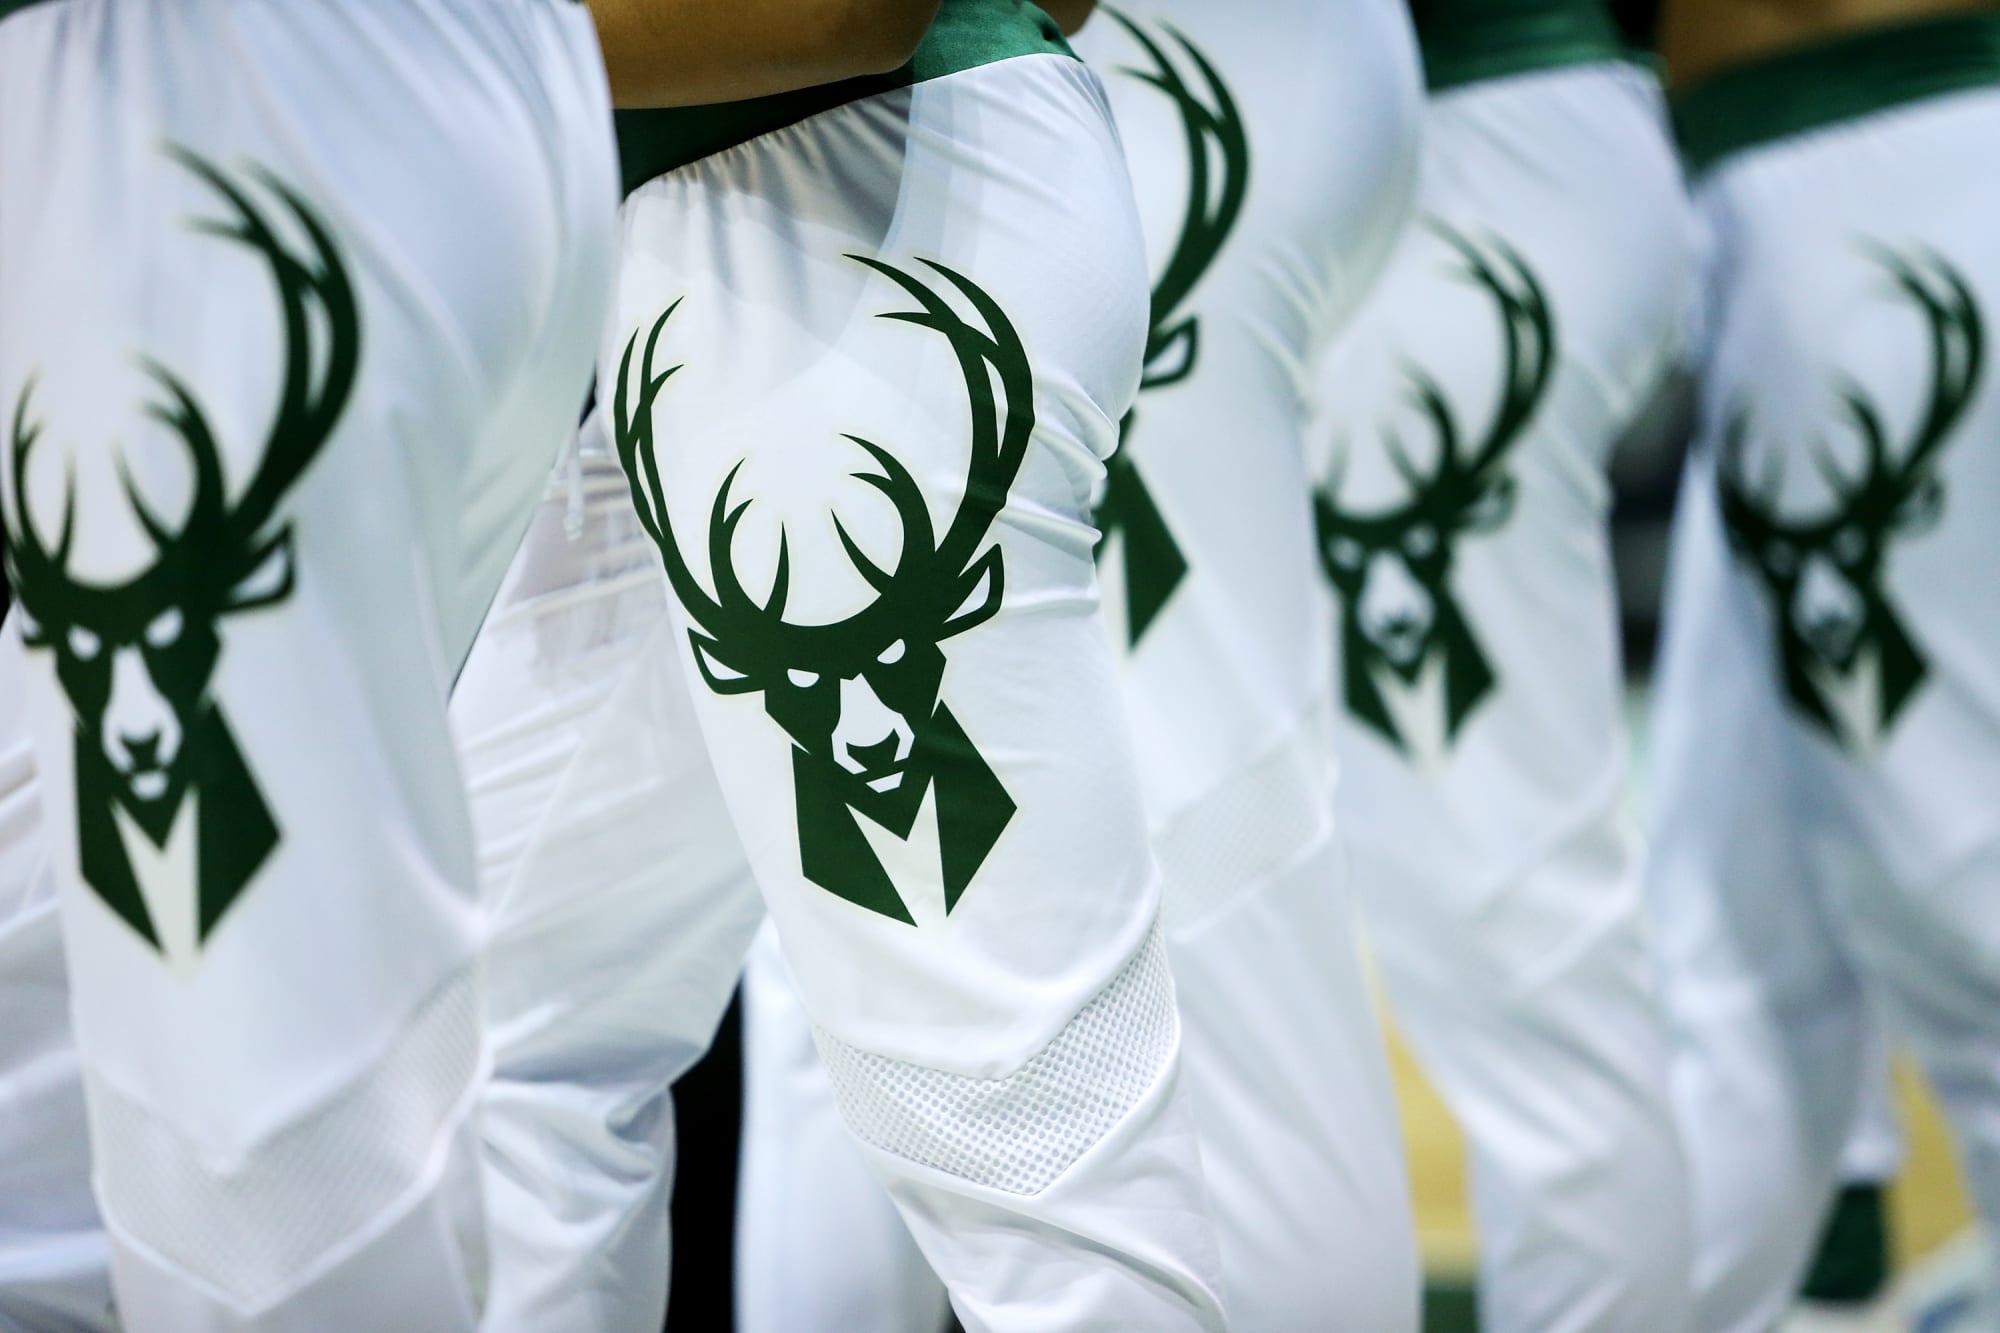 Perfect fit: Bucks, Harley-Davidson excitedly unveil jersey patch